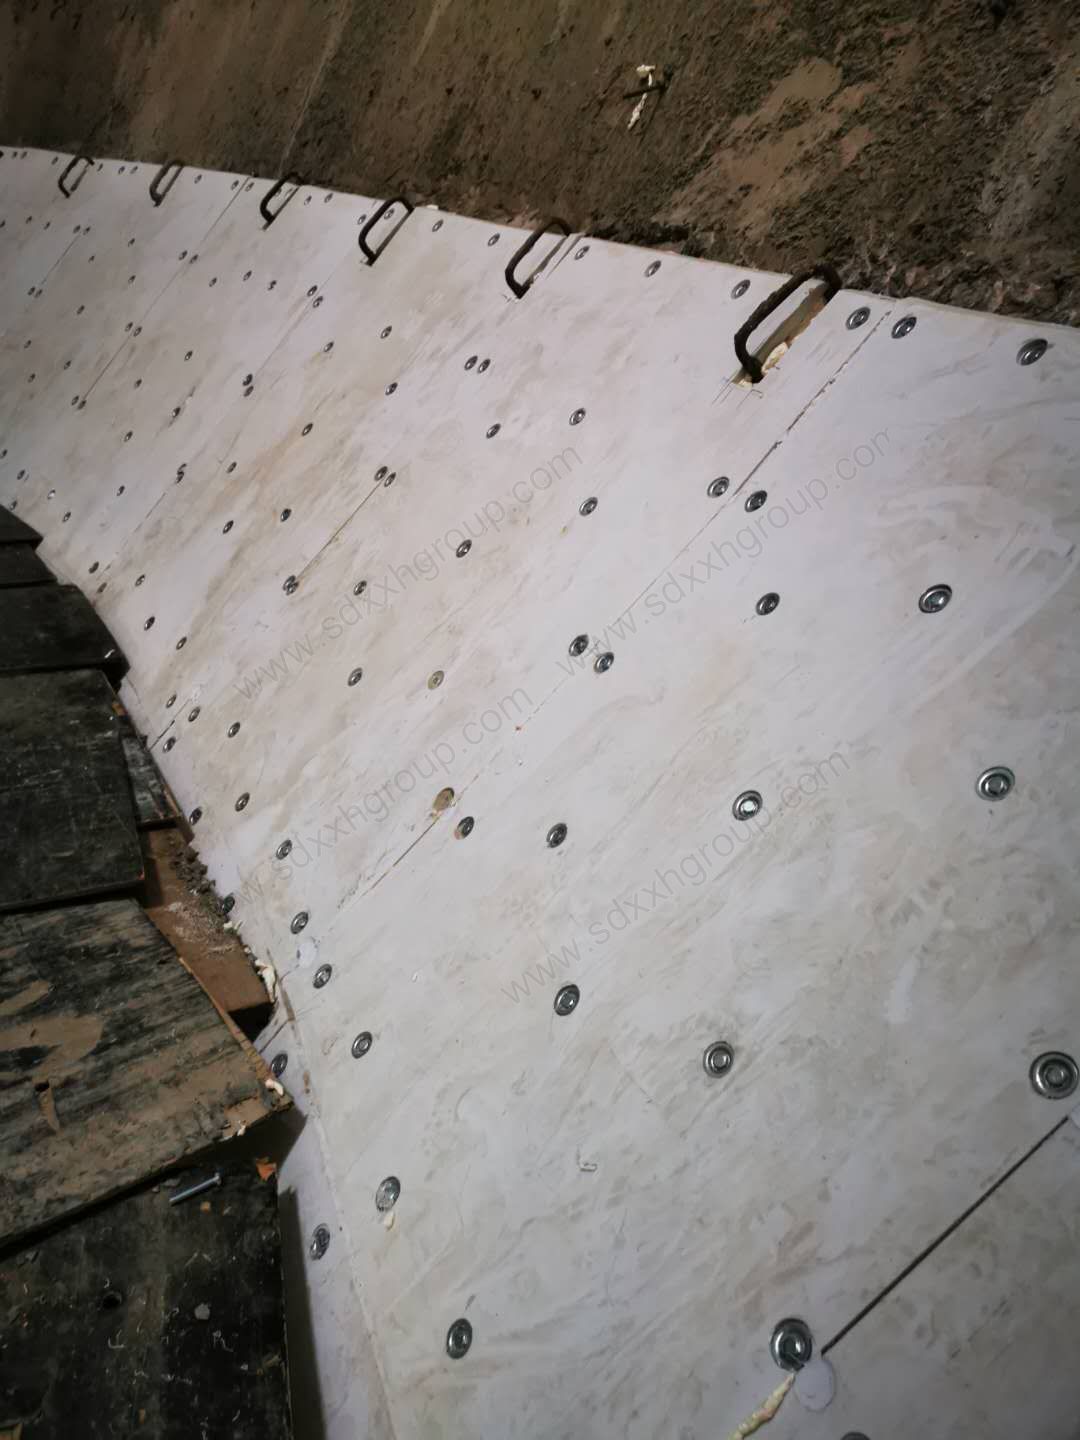 customized abrasion resistant bunker lining plate